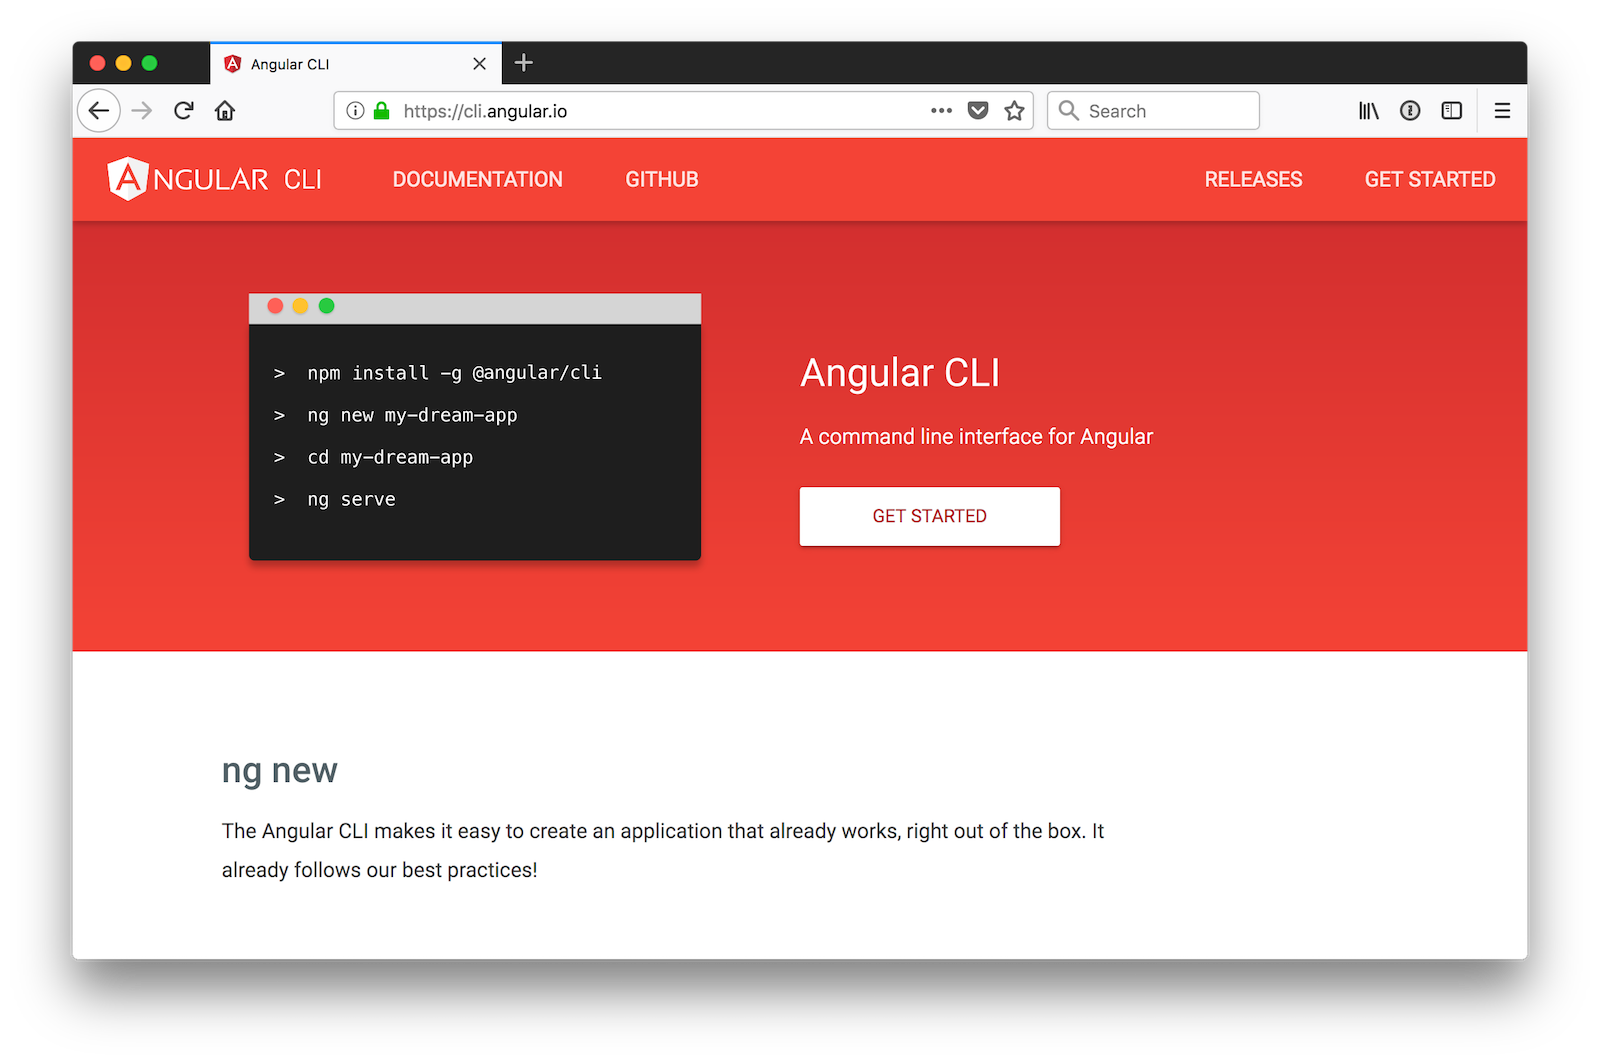 build a basic crud app with angular 7. and spring boot 2.1